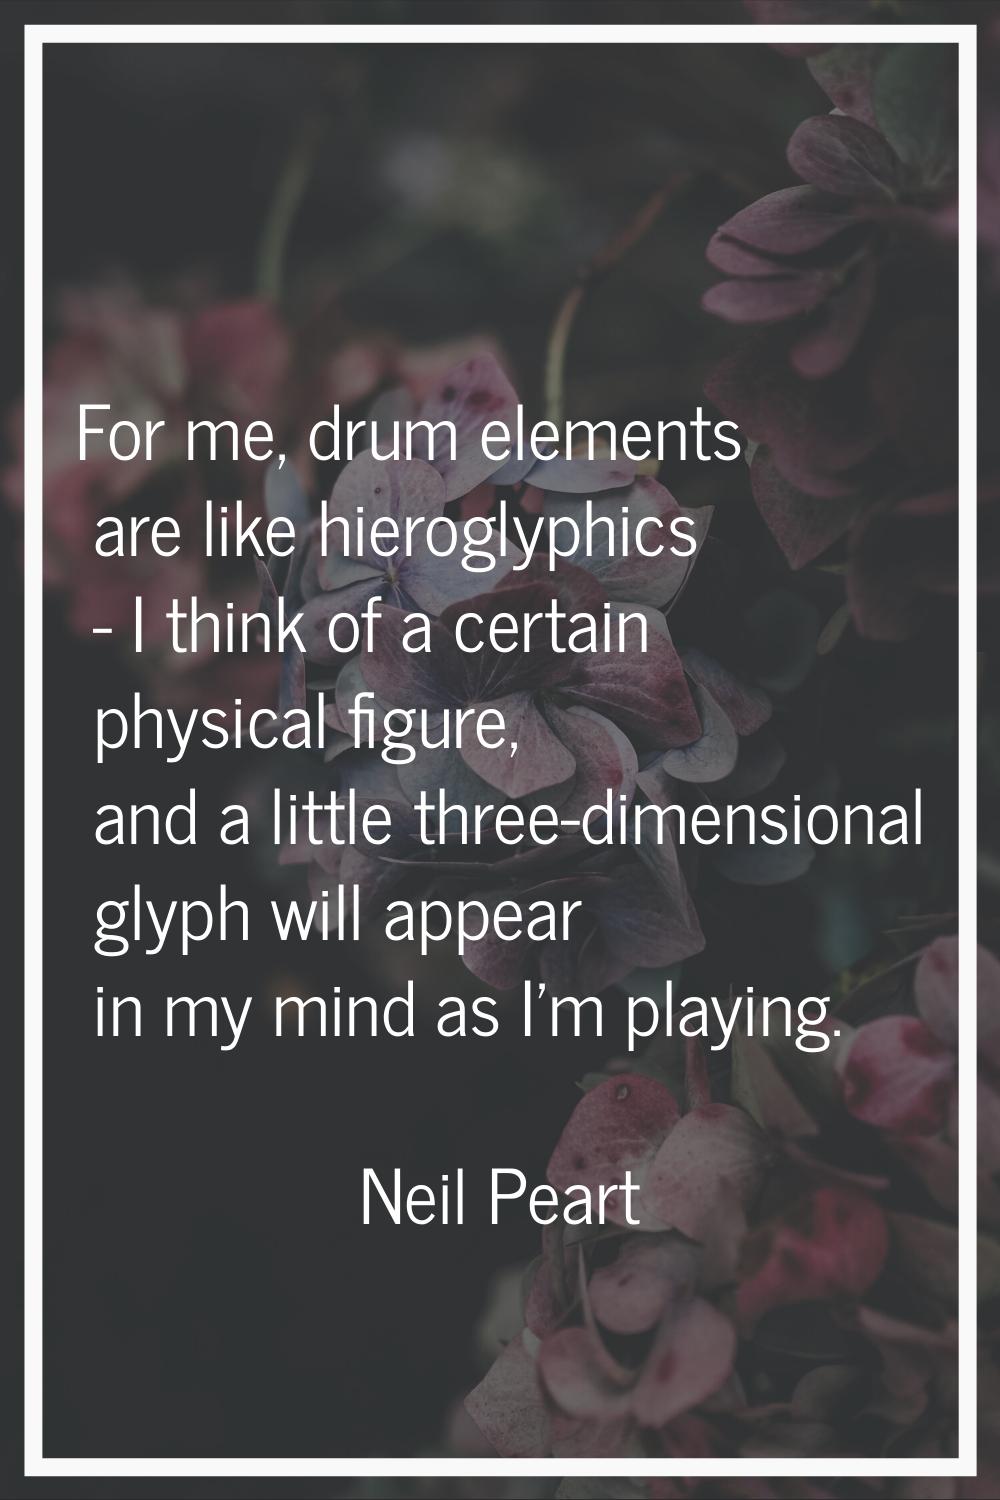 For me, drum elements are like hieroglyphics - I think of a certain physical figure, and a little t